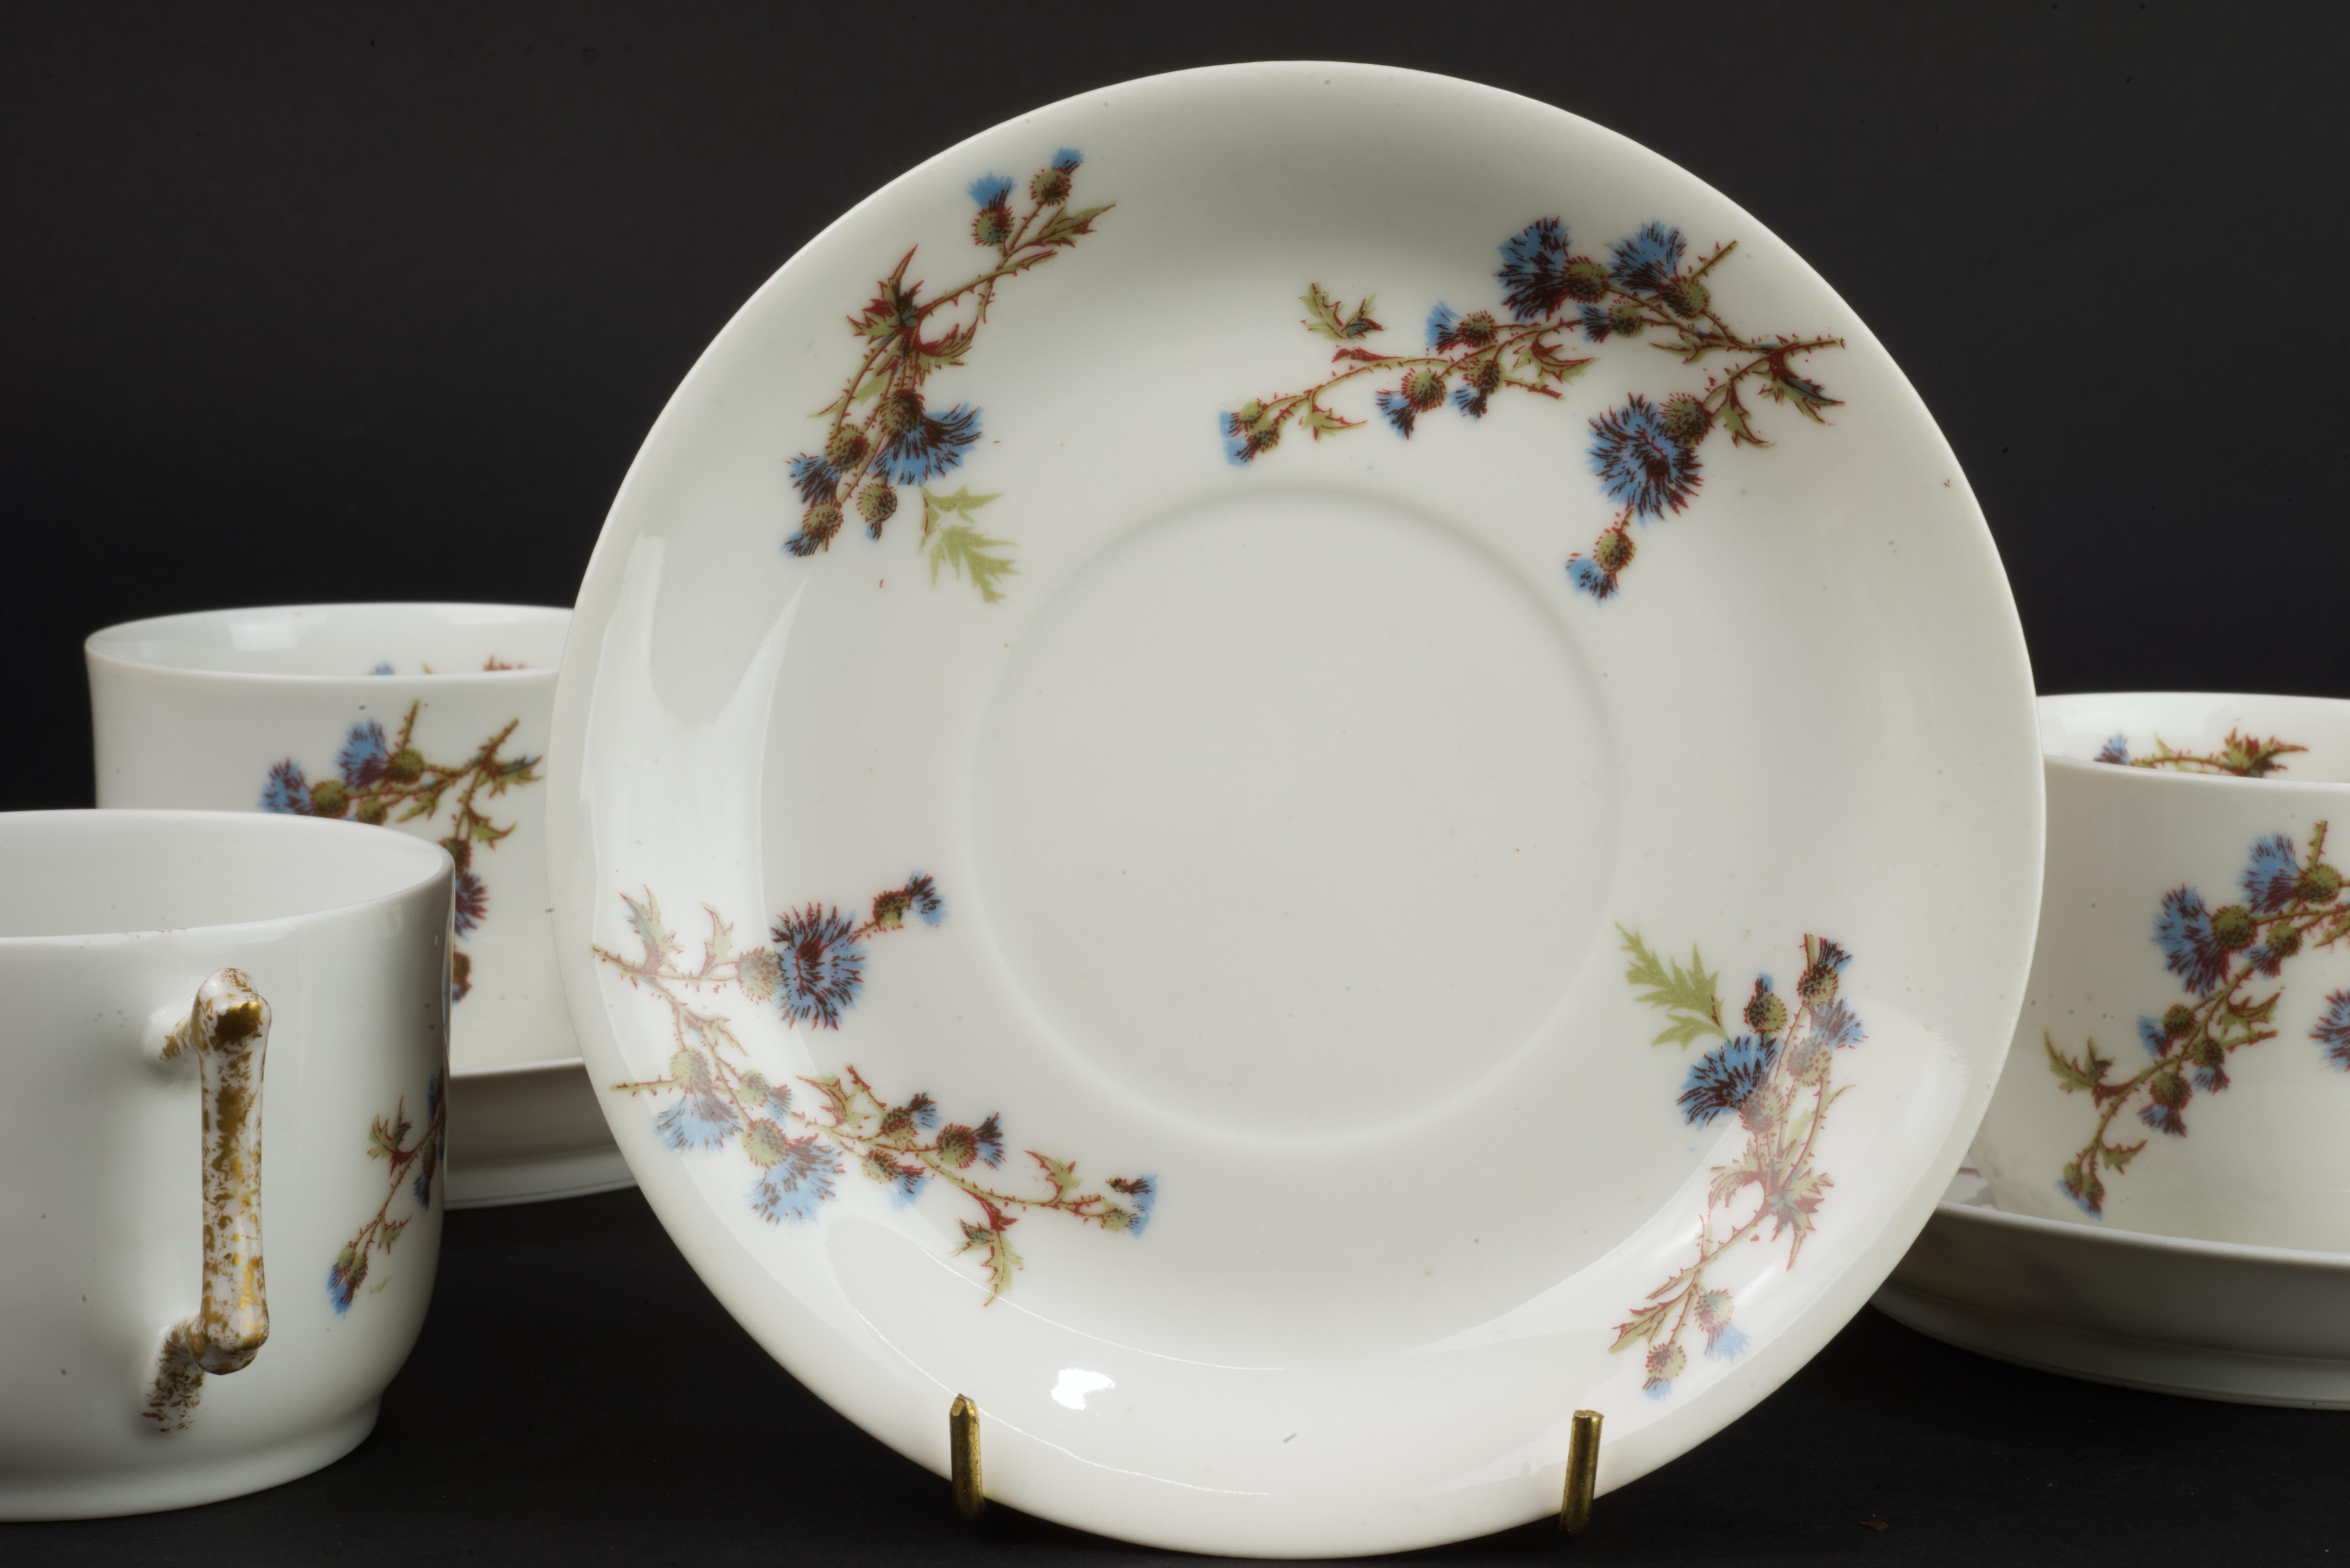 Glazed Guerin &Co Limoges France Set of 3 Cups and Saucers Bone China, 1891-1900 For Sale